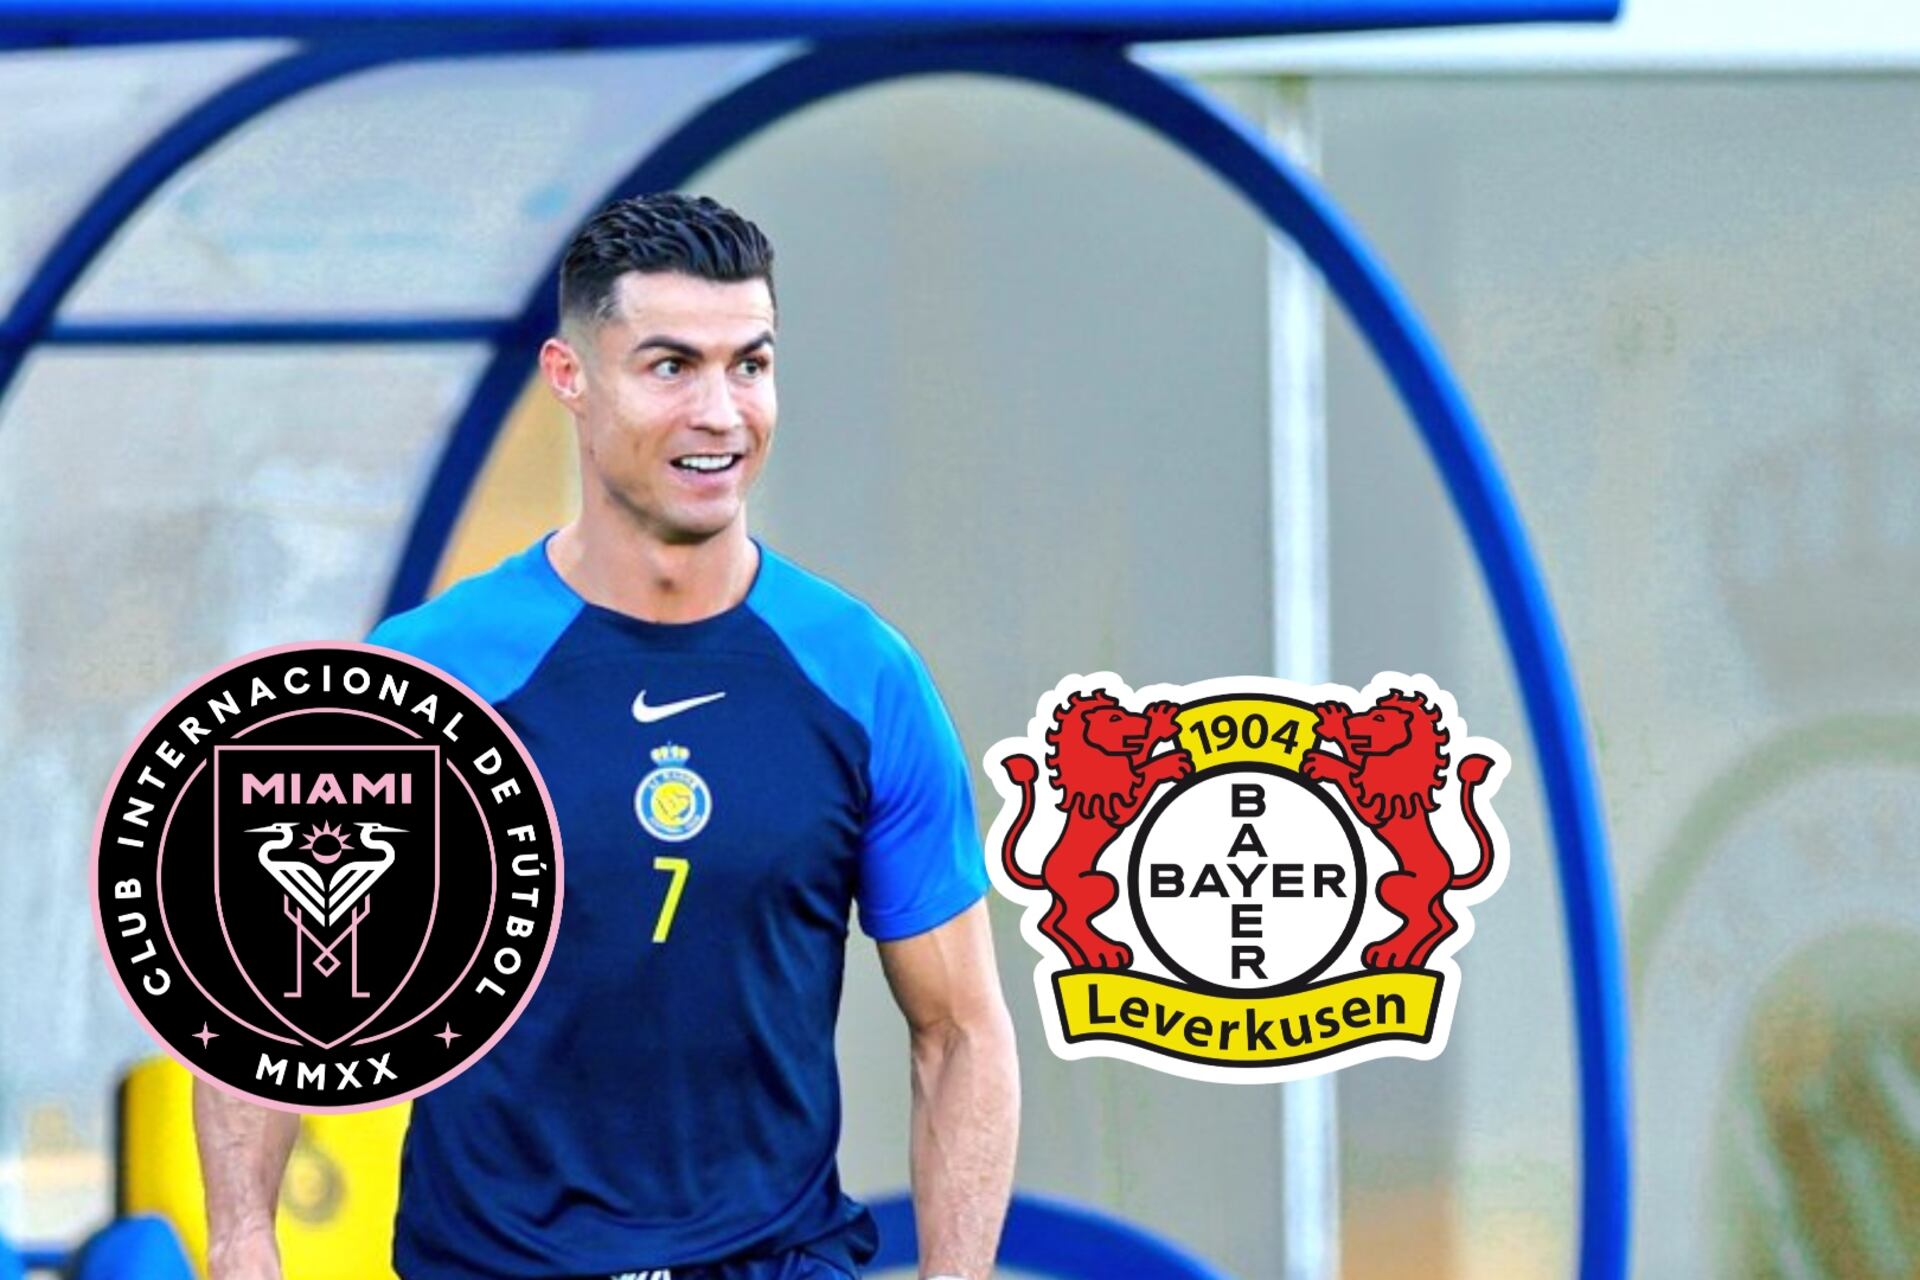 The leaked picture that could confirm Cristiano’s future, it would be neither in Miami nor in Leverkusen